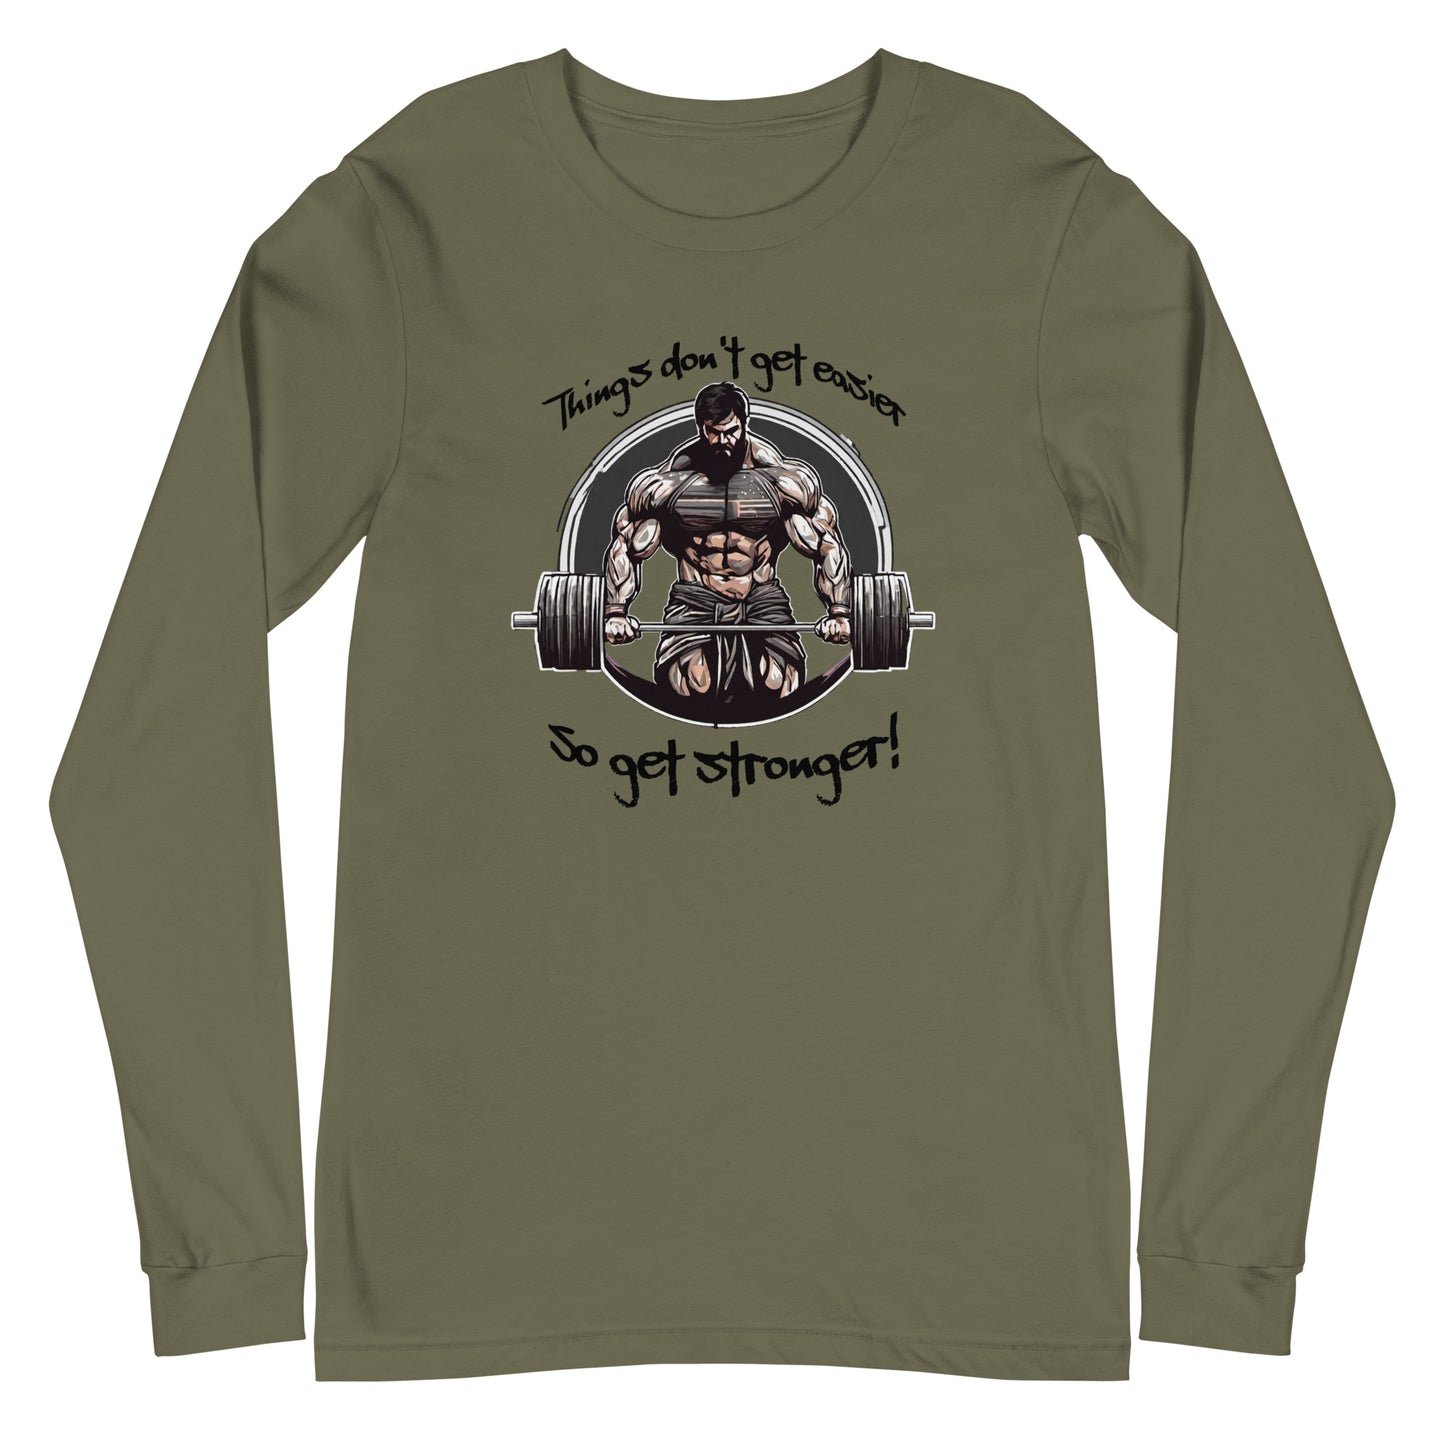 Life's Hard, Get Strong Men's Long Sleeve Tee Military Green